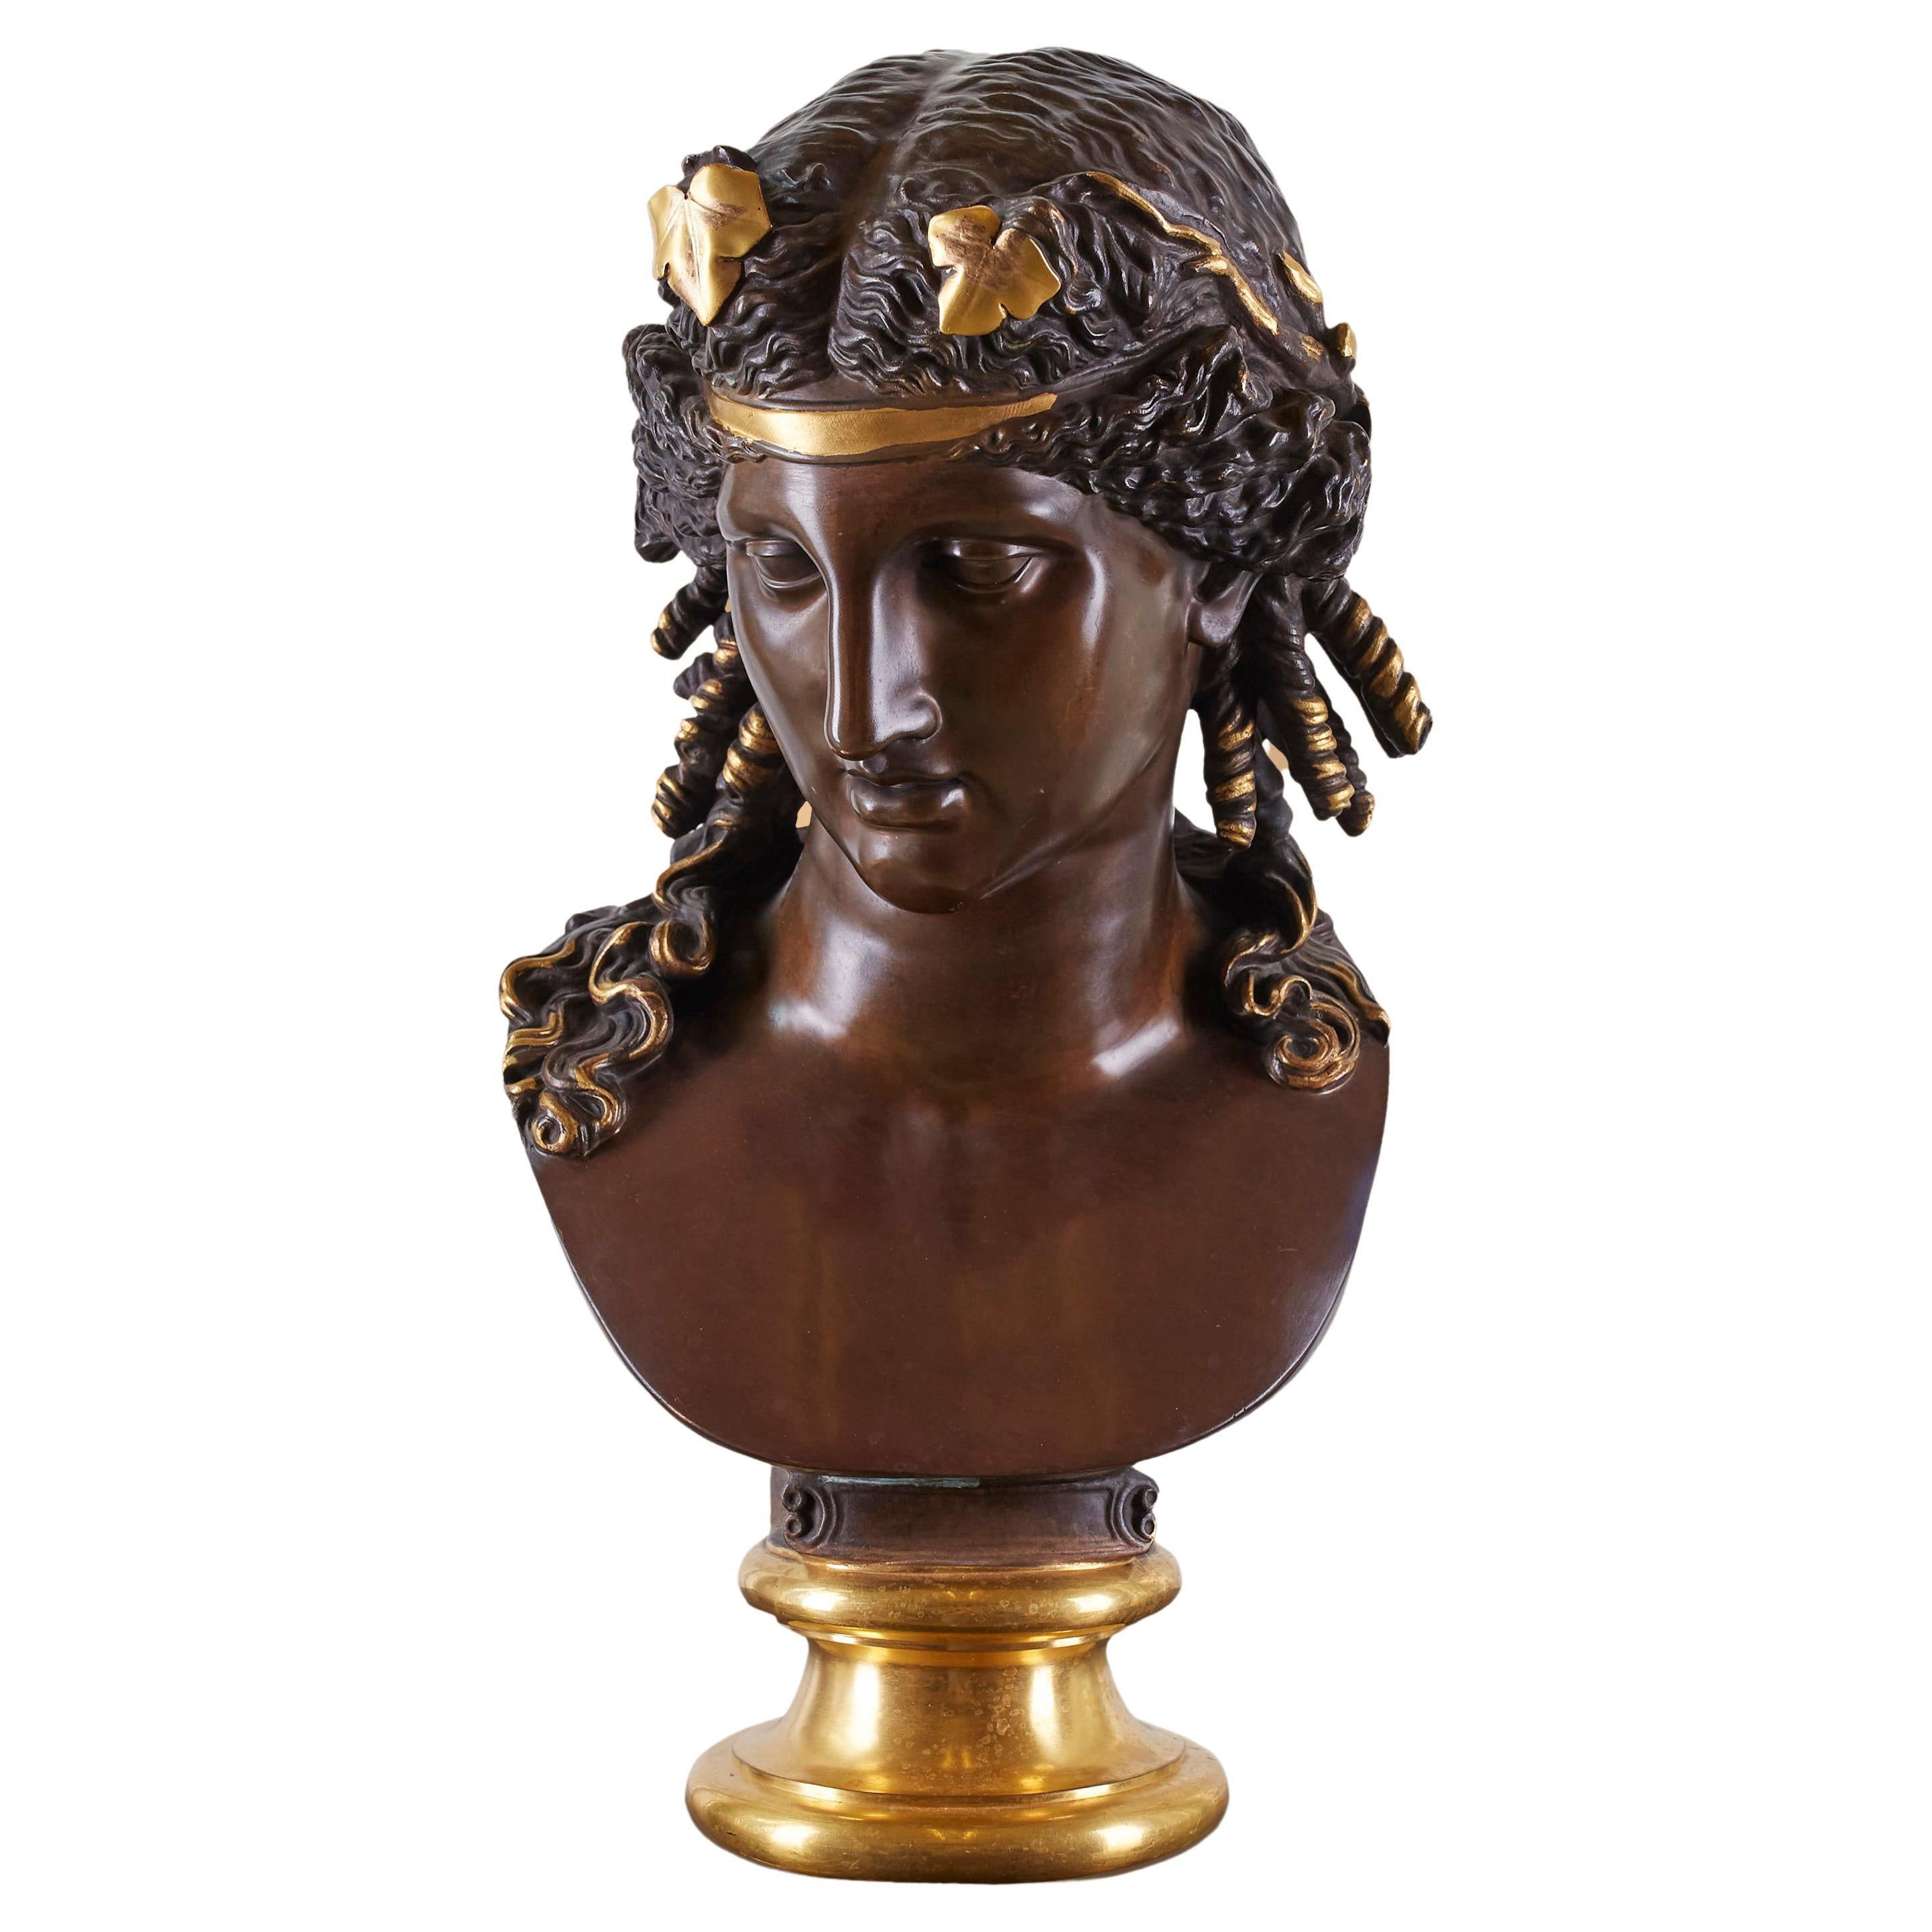 "A French Patinated Bronze Bust of Ariadne by F. Barbedienne